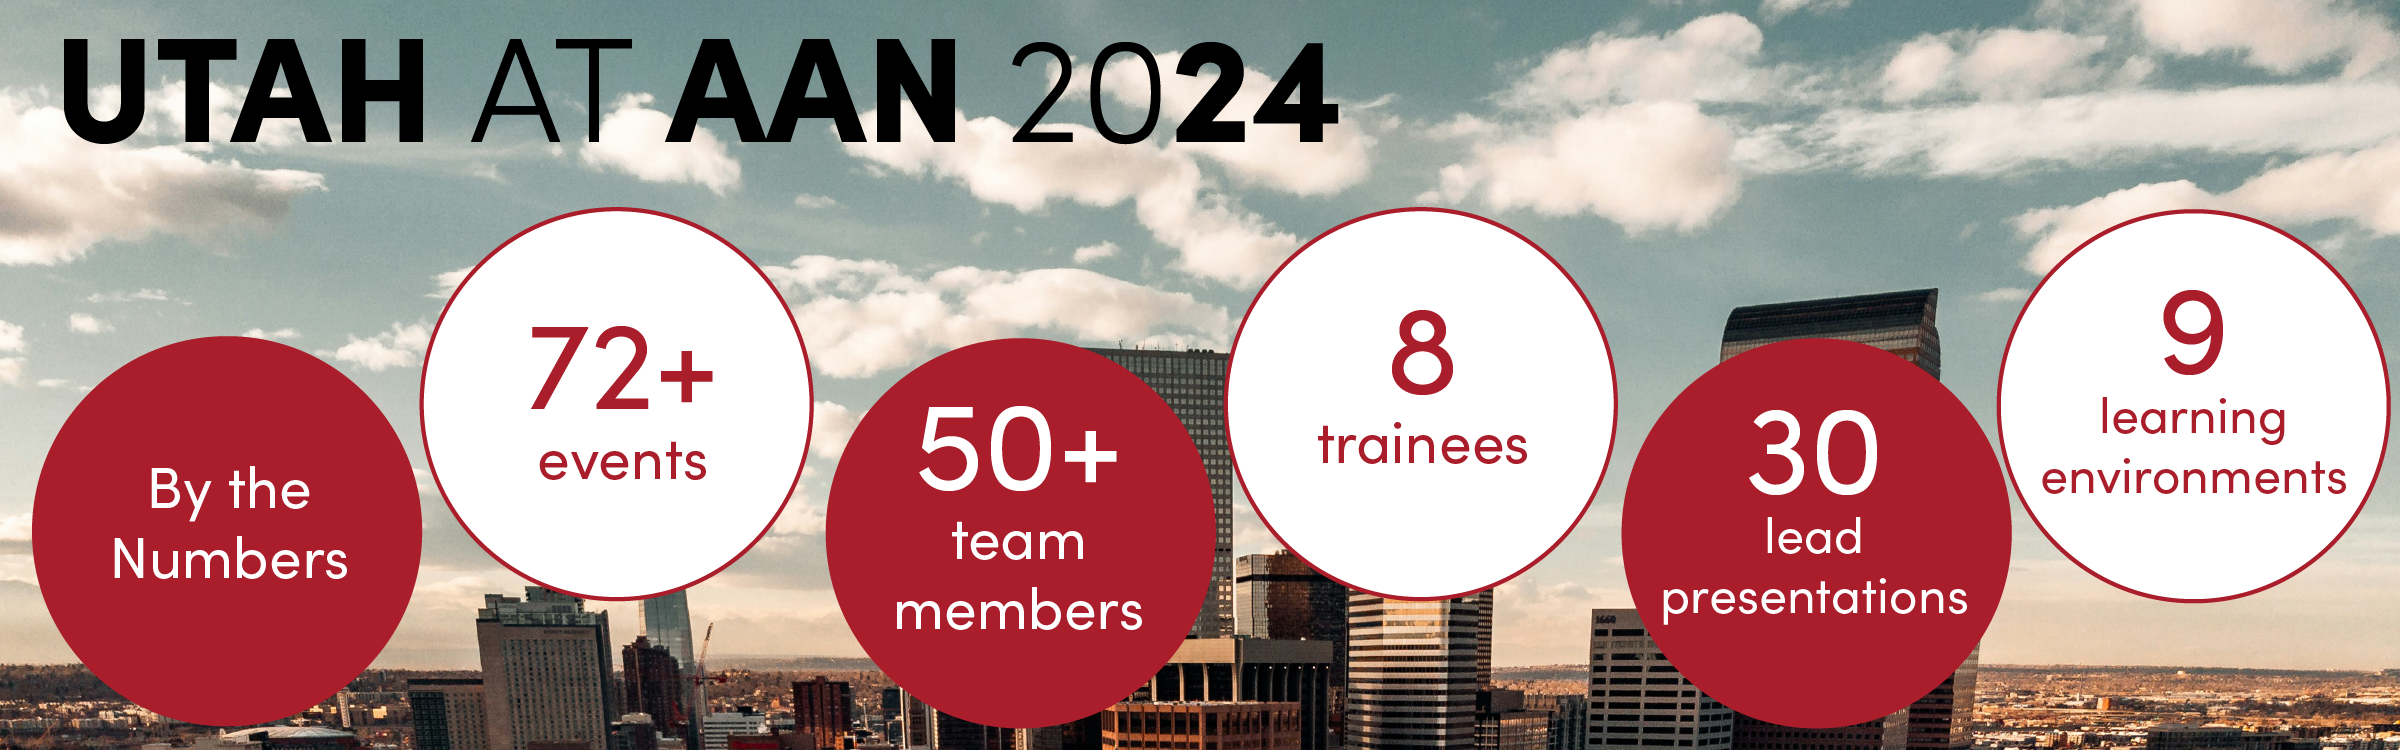 AAN 2024 by the Numbers